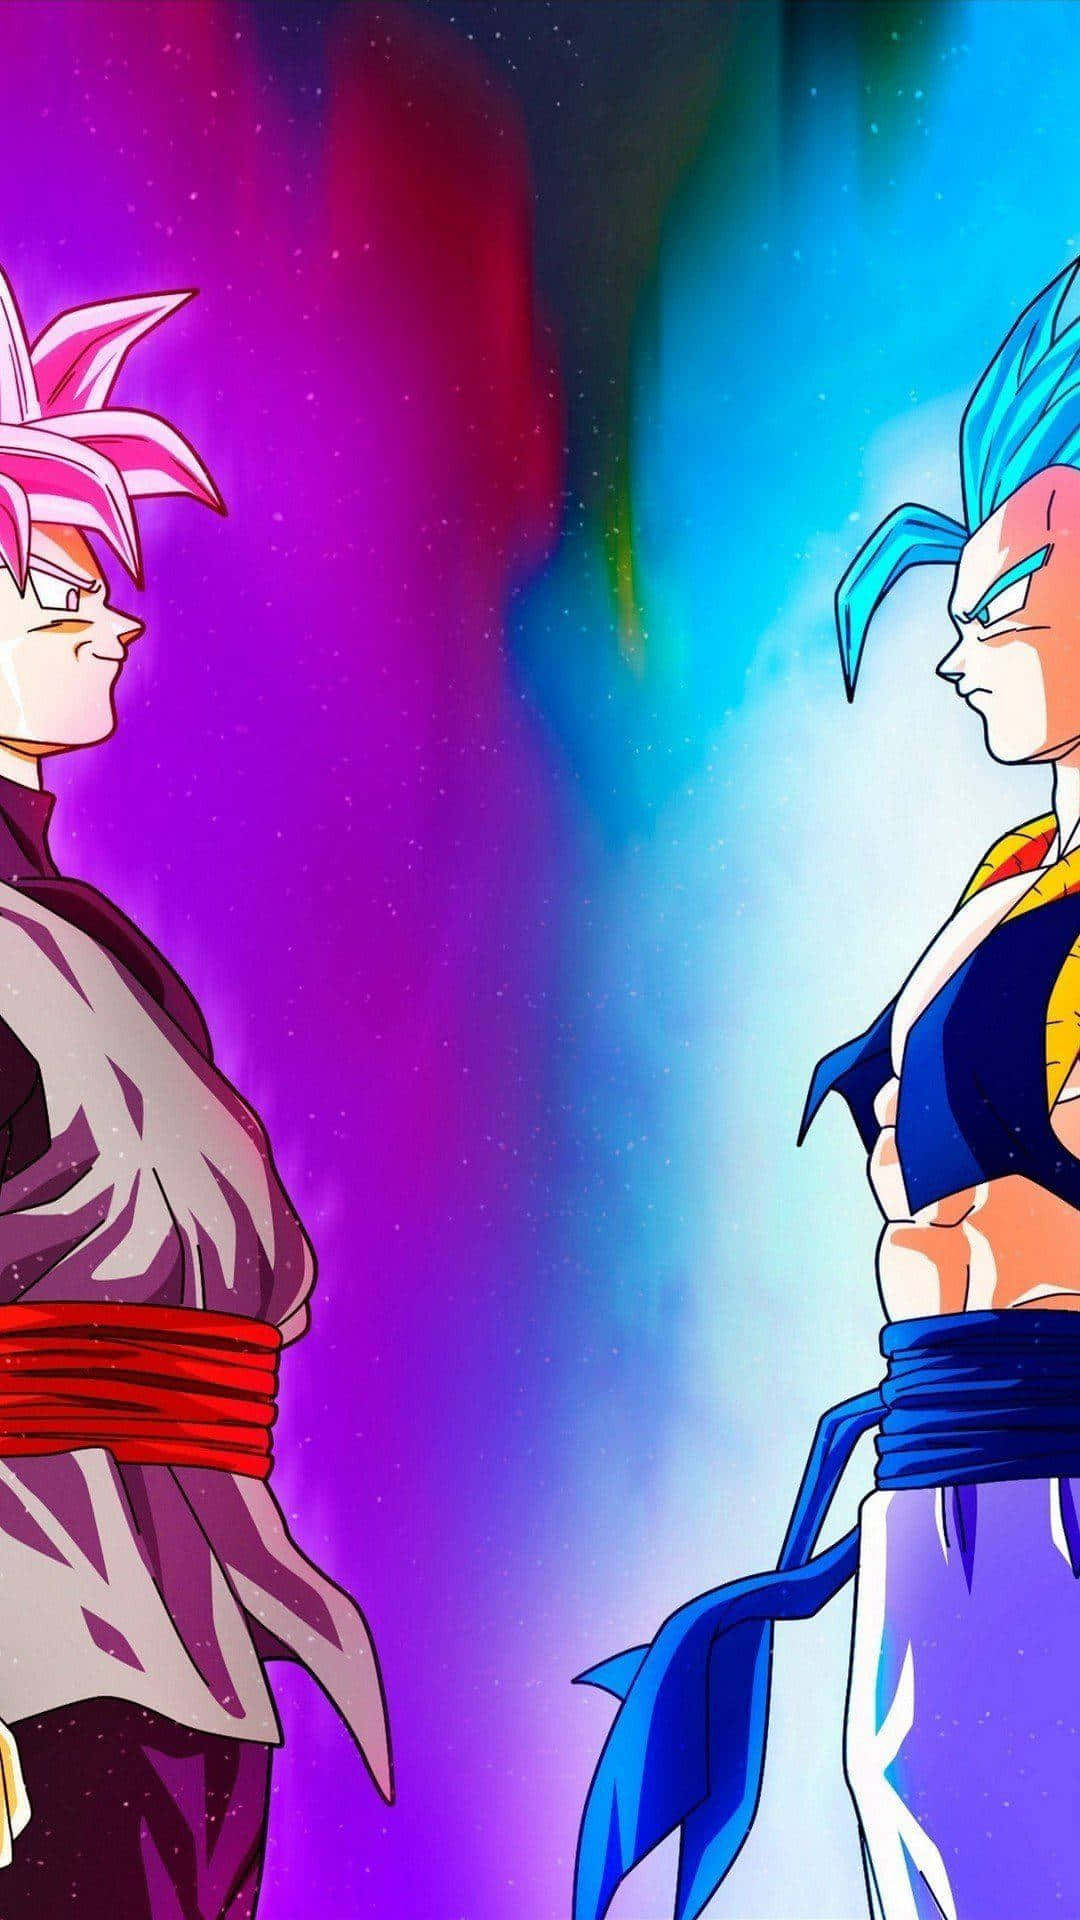 Experience Ultra HD clarity with this amazing wallpaper featuring Goku and Vegeta from Dragonball! Wallpaper